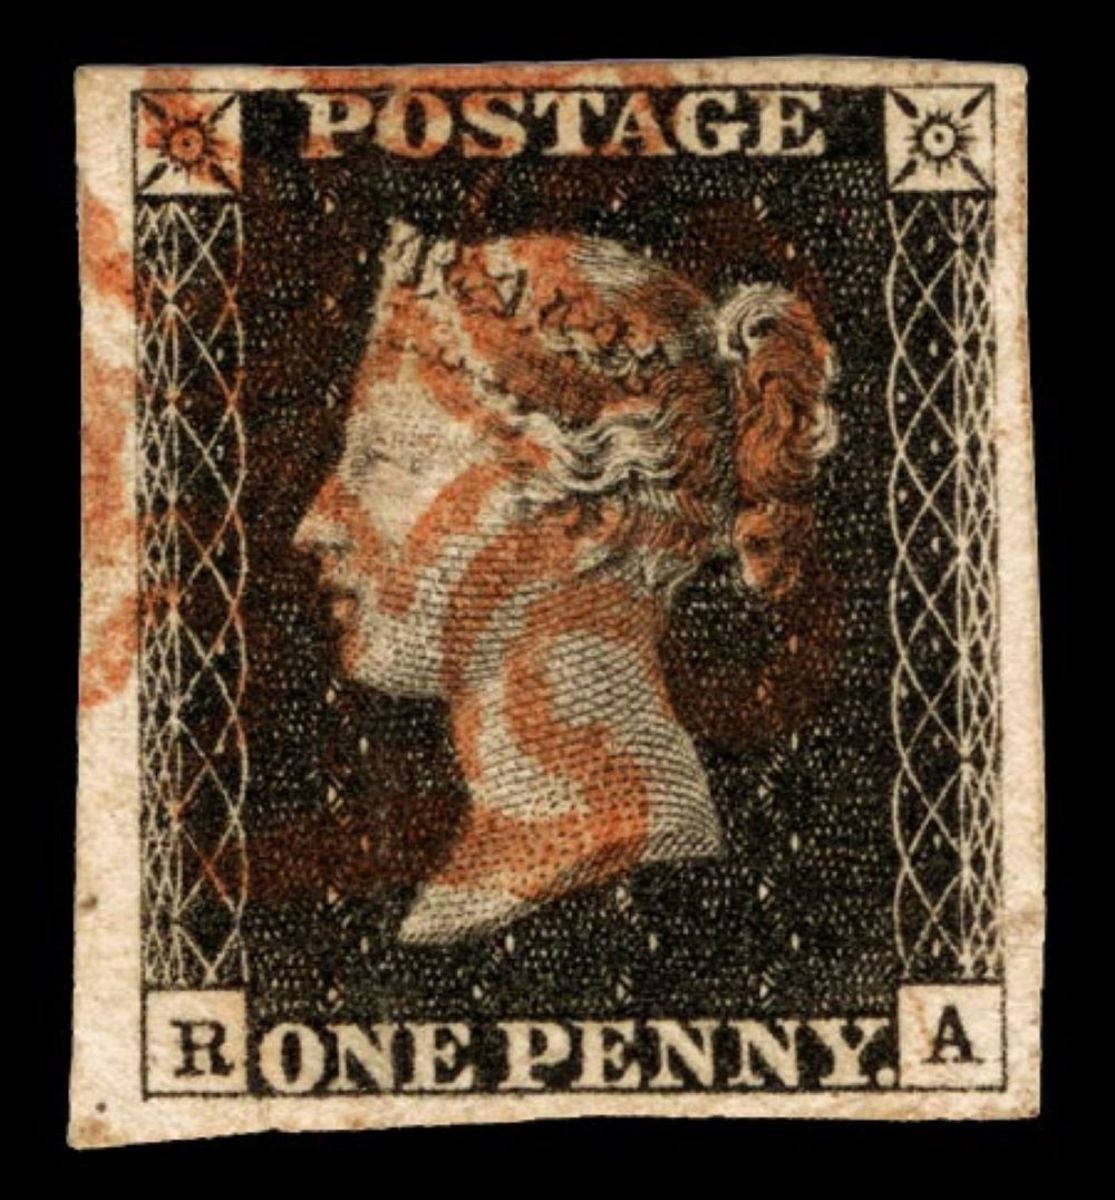 The Penny Black had a flaw that allowed fraud. 